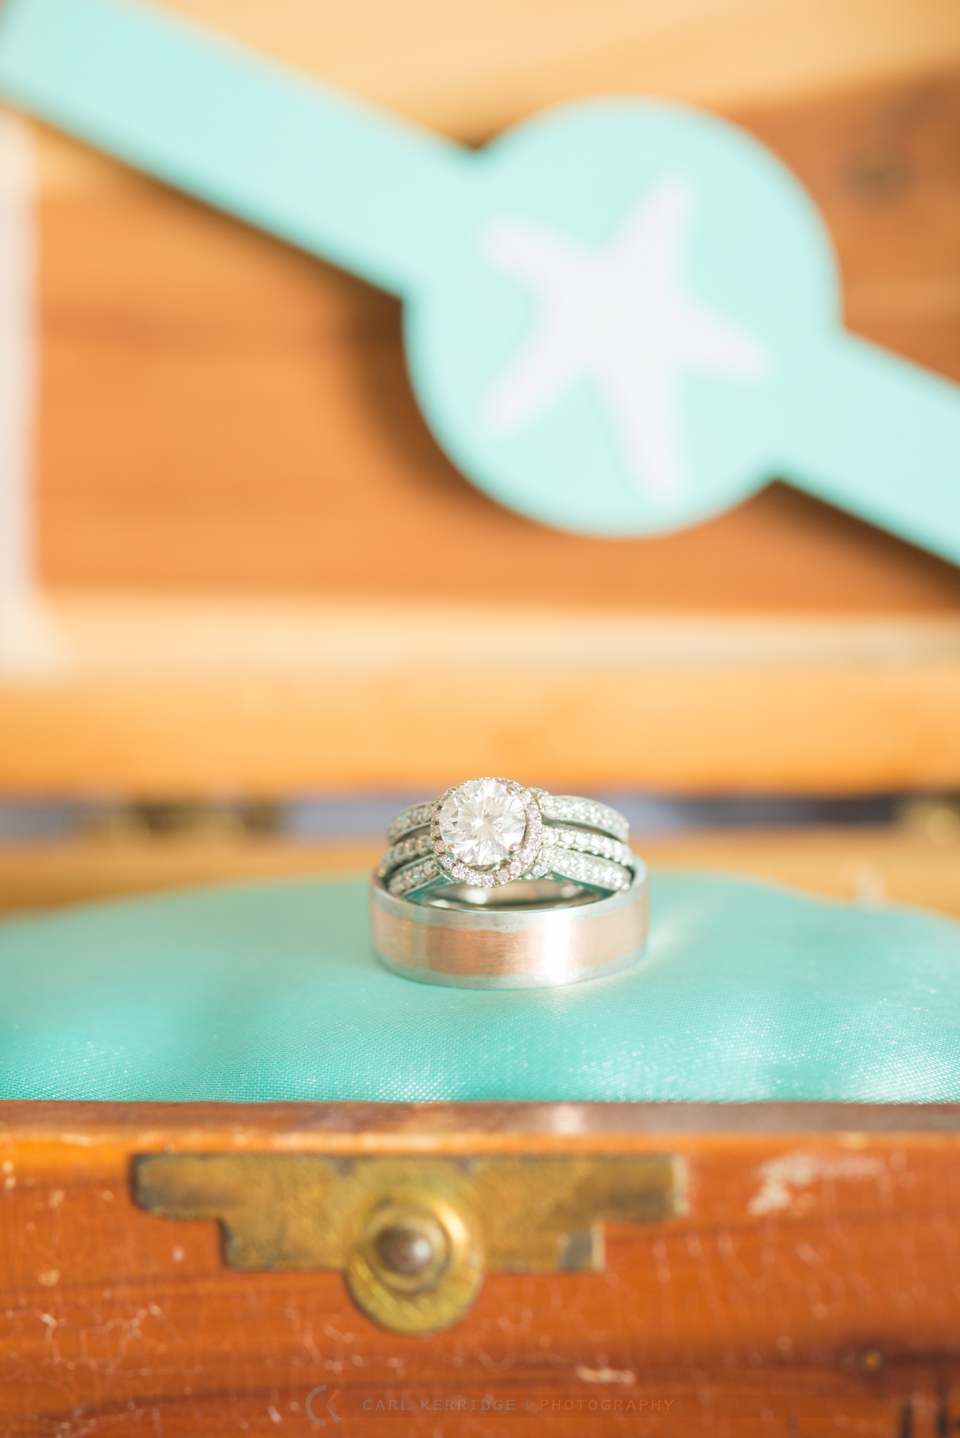 Wedding details, Beautiful wedding rings on teal cushion in wooden box